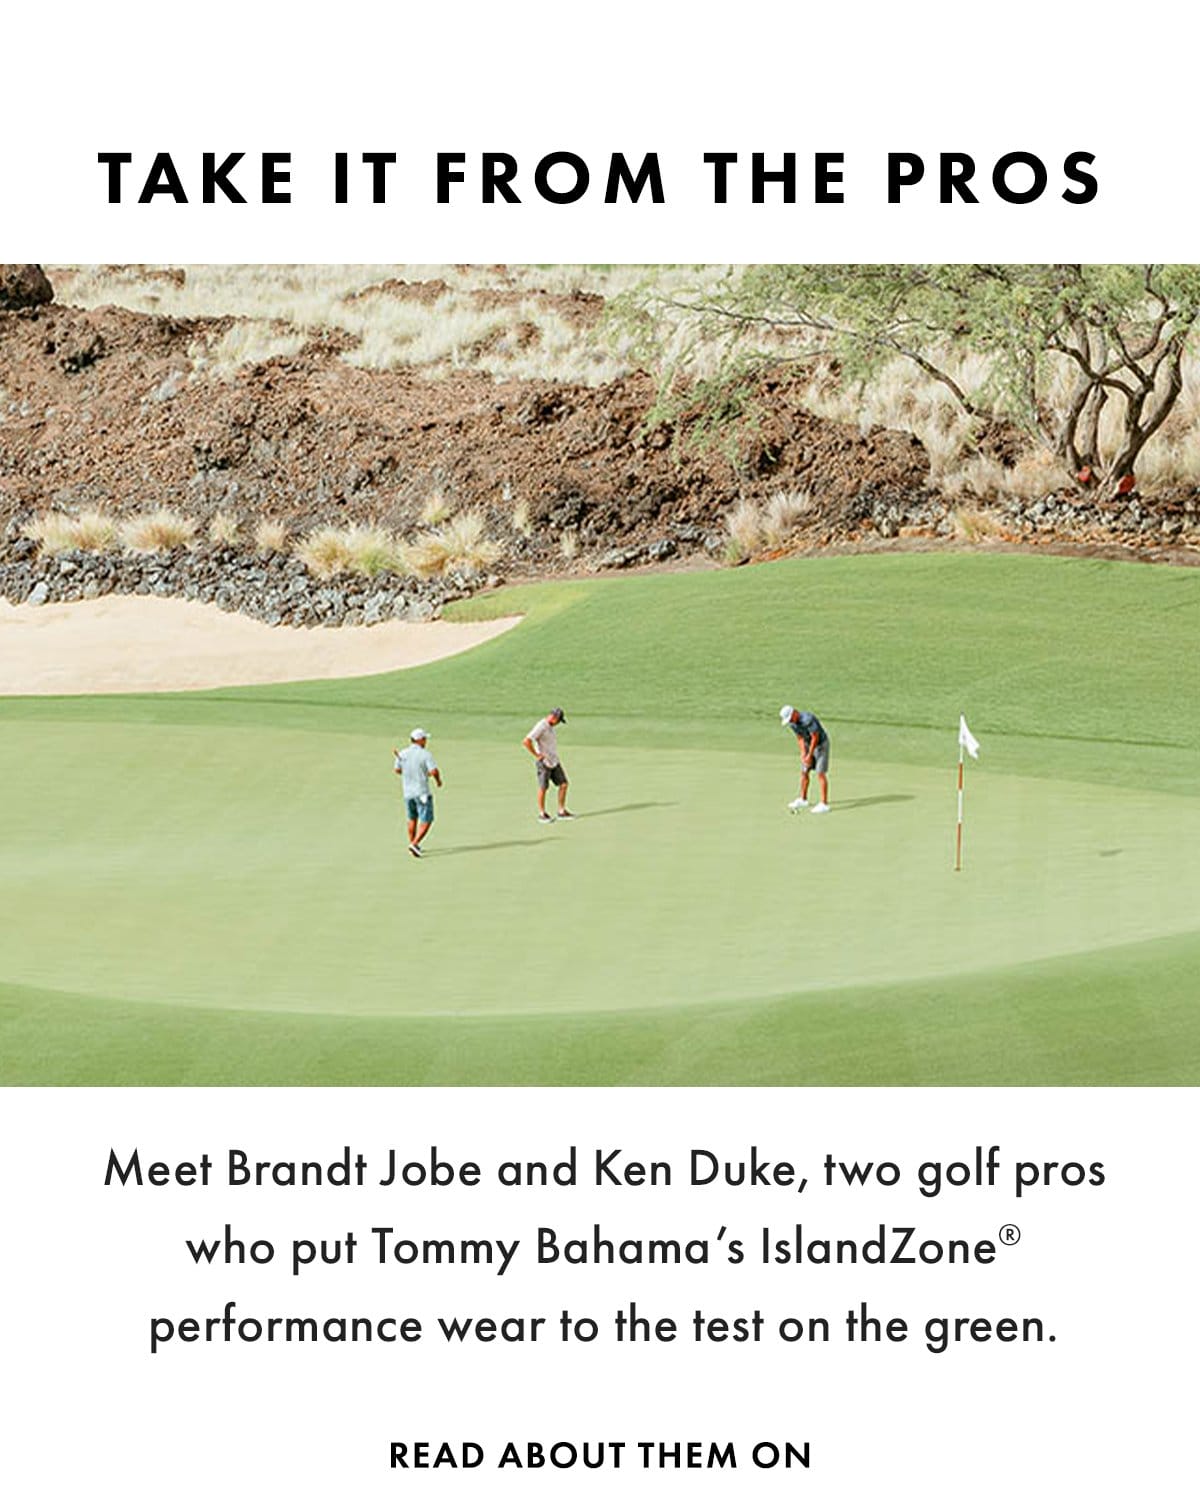 Take it from the Pros: Meet Brandt Jobe and Ken Duke, two golf pros who put Tommy Bahama's IslandZone performance wear to the test on the green.